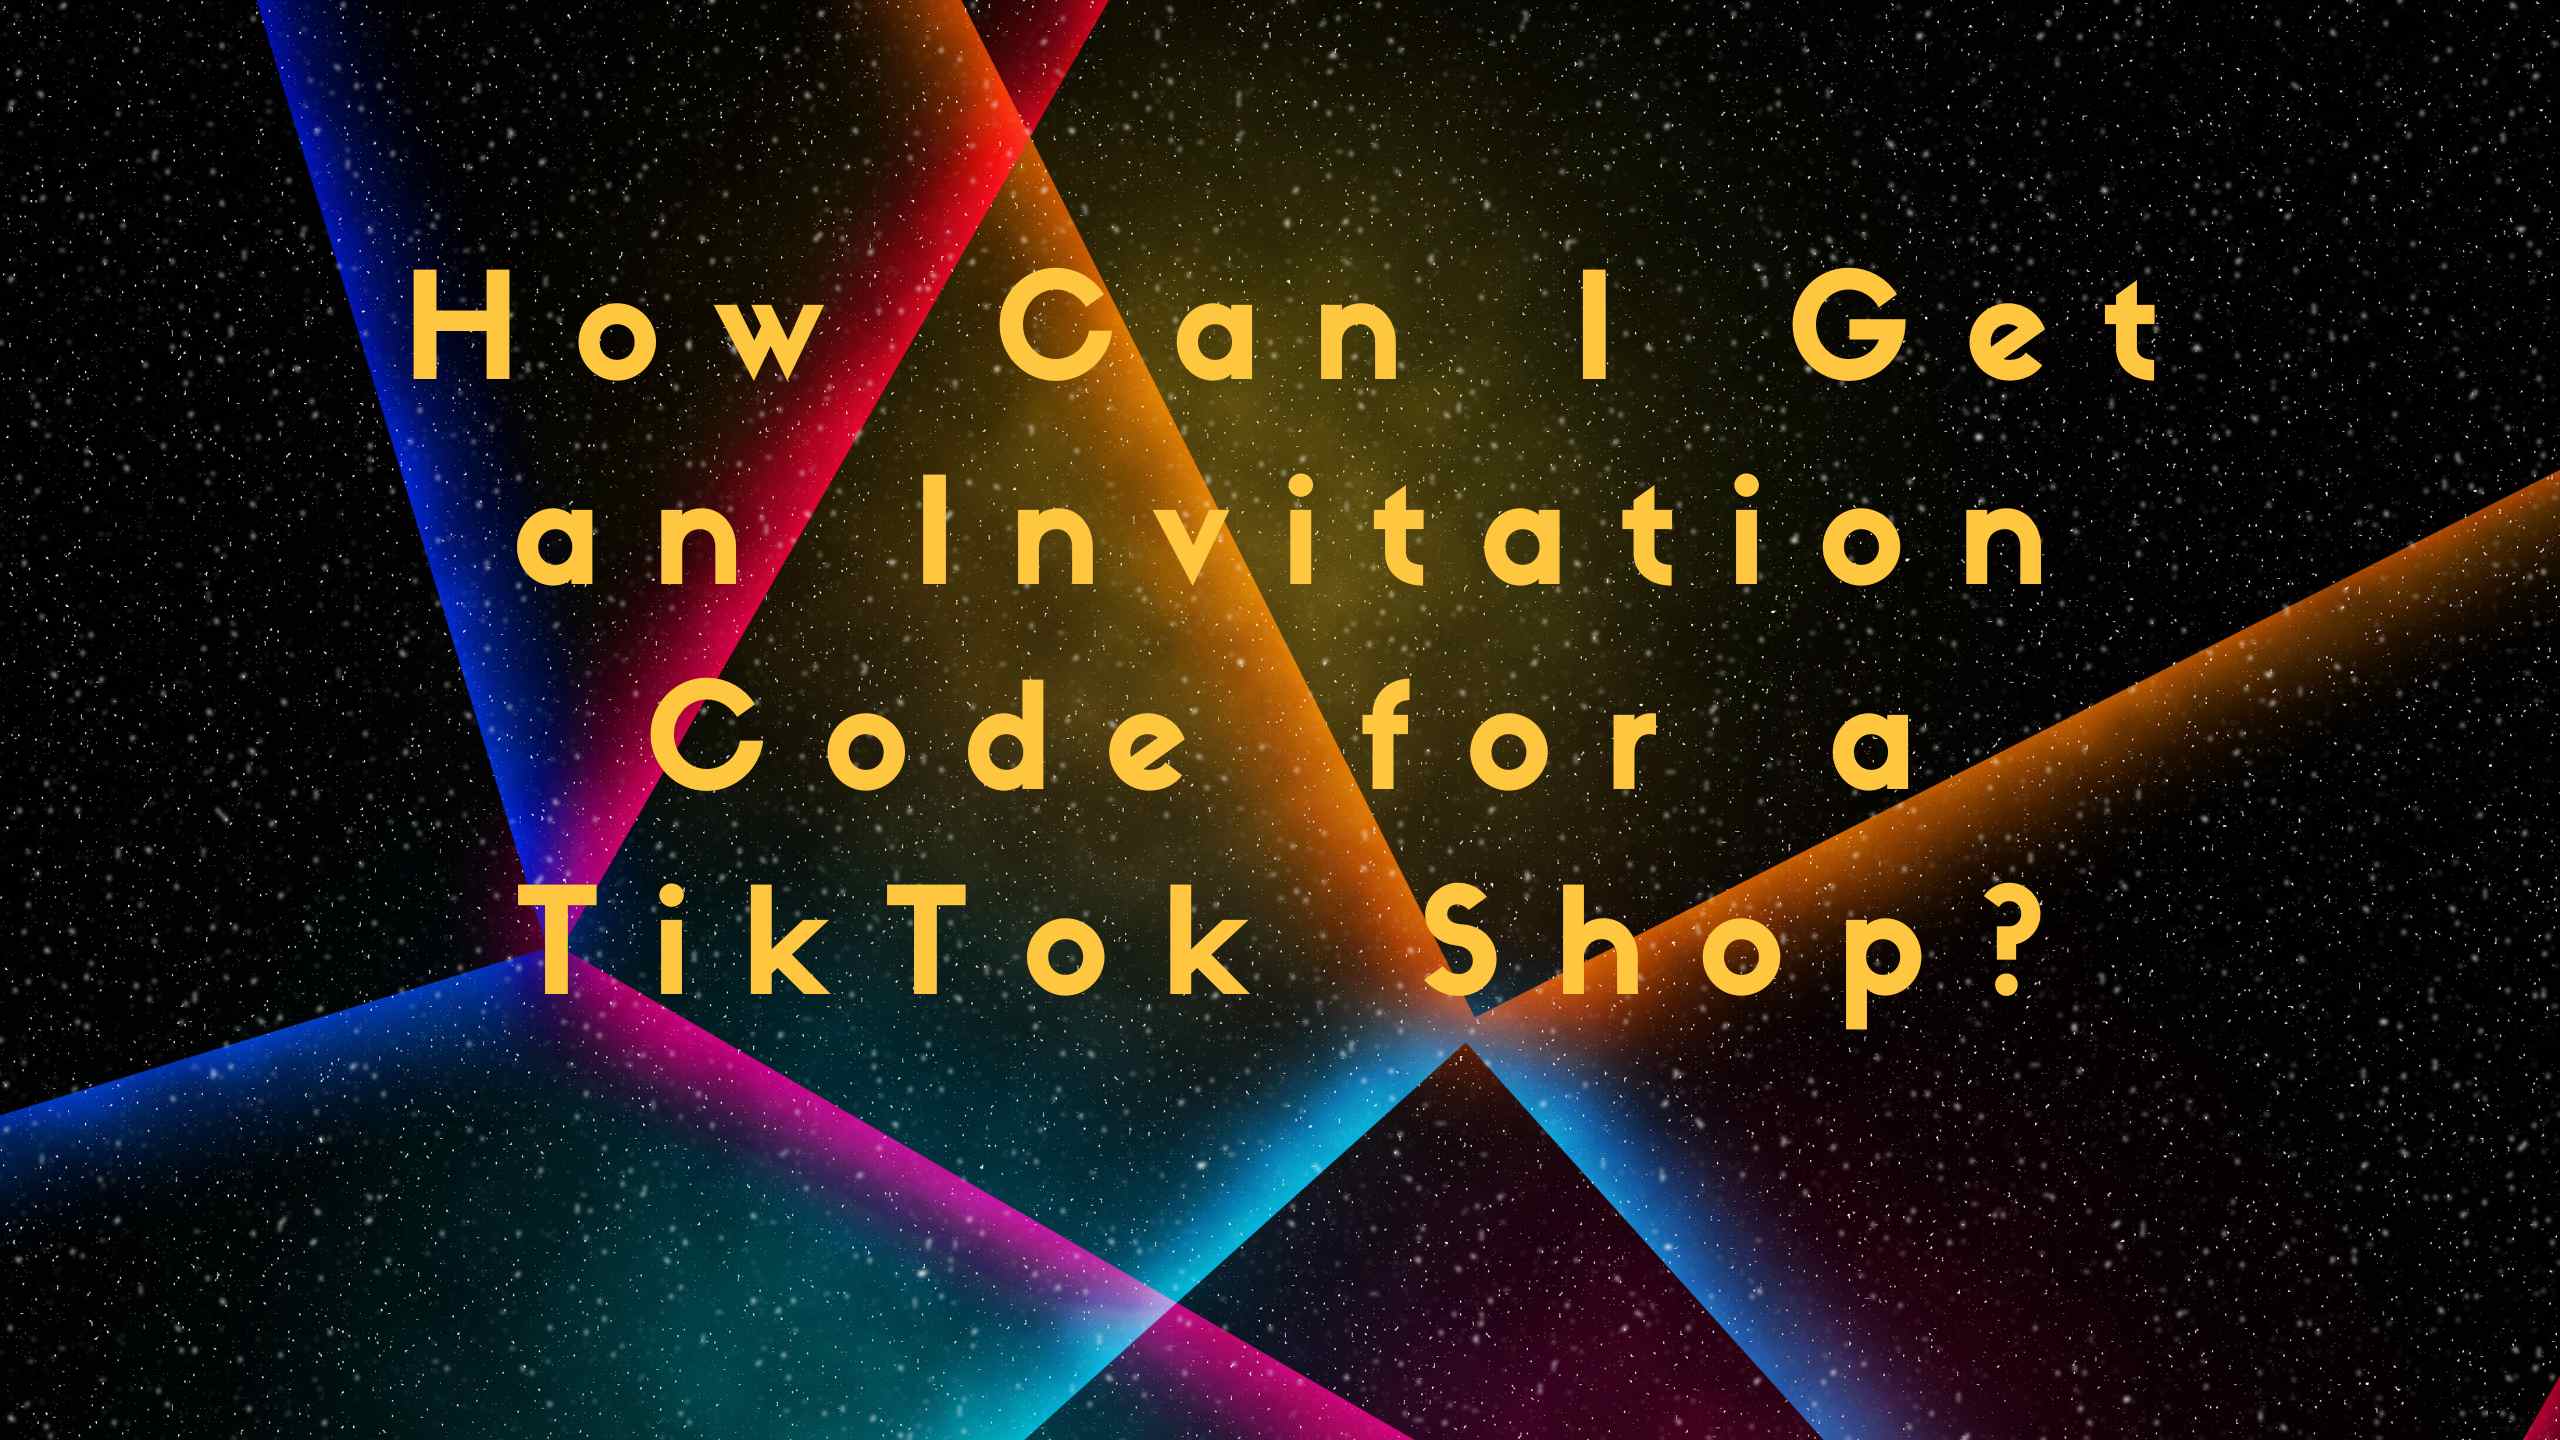 How Can I Get an Invitation Code for a TikTok Shop?